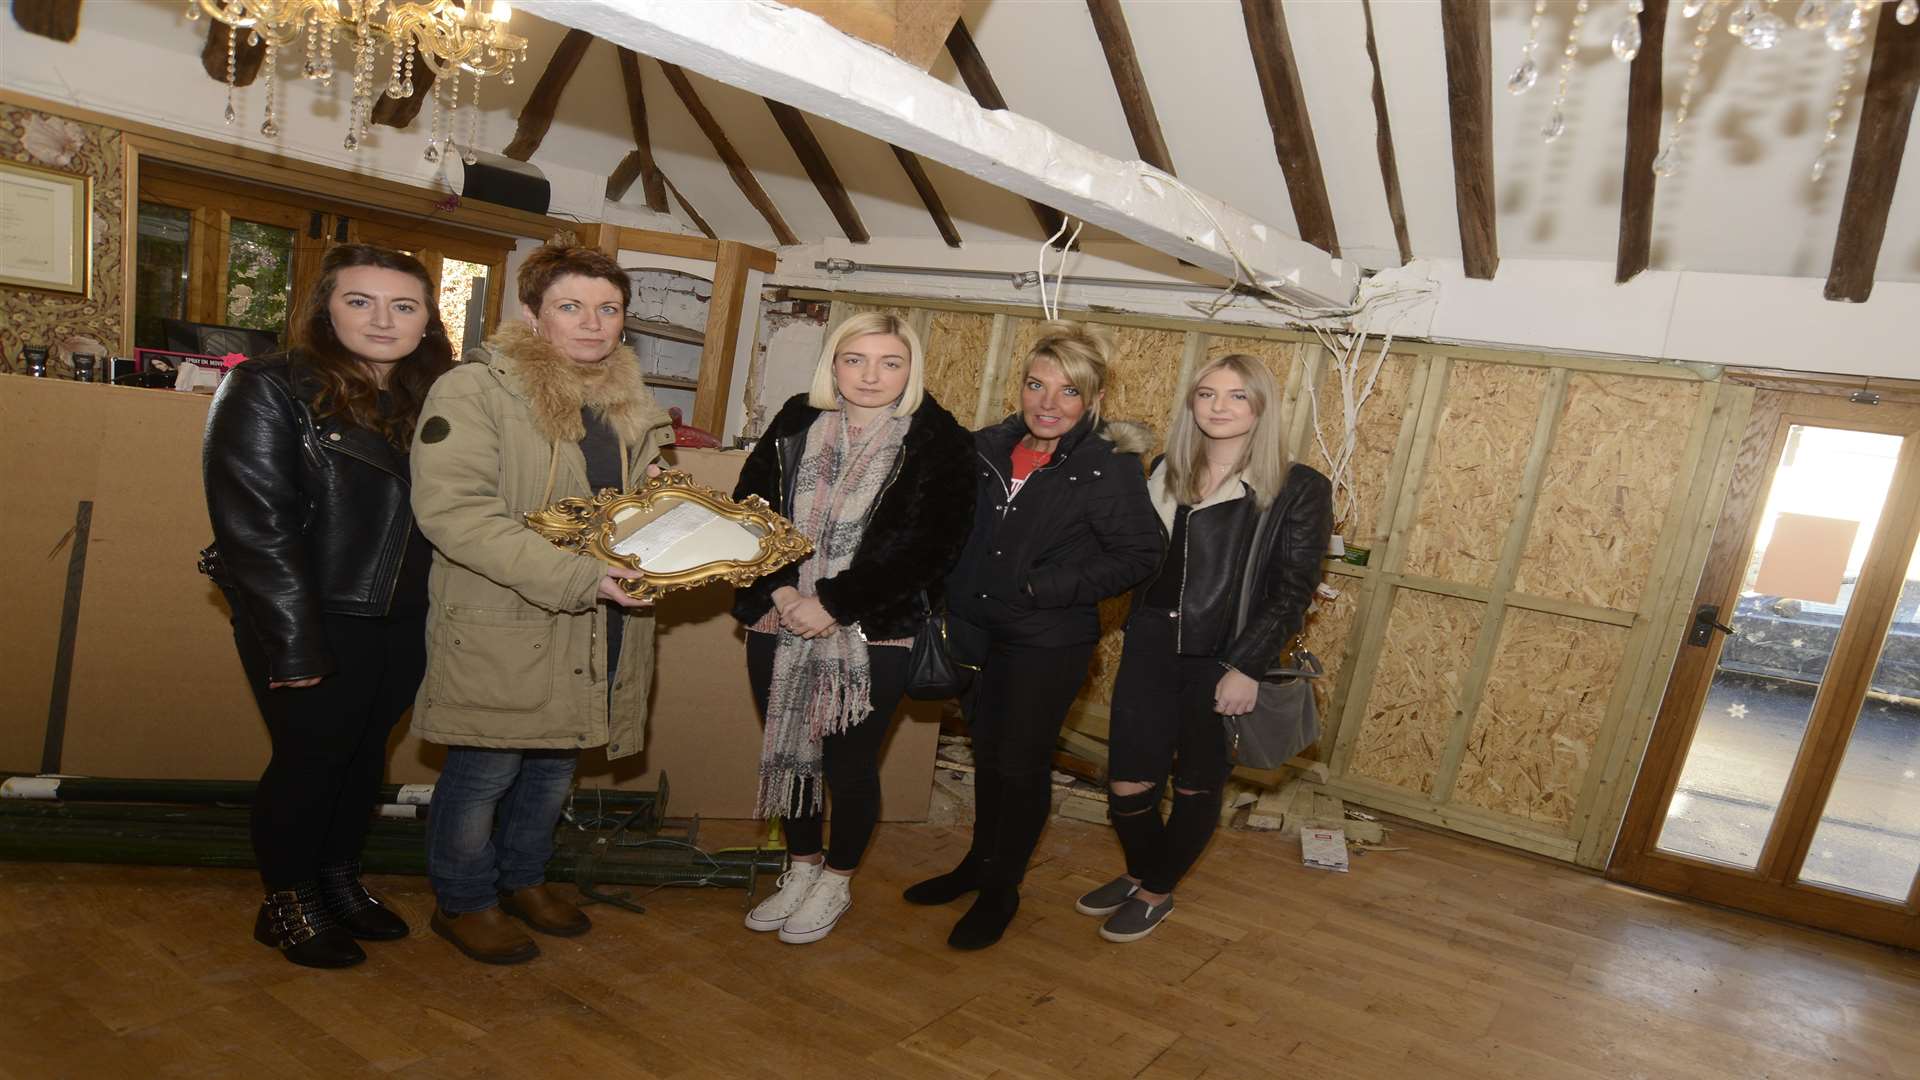 Owner Jenny Taylor and staff by the boarded up window